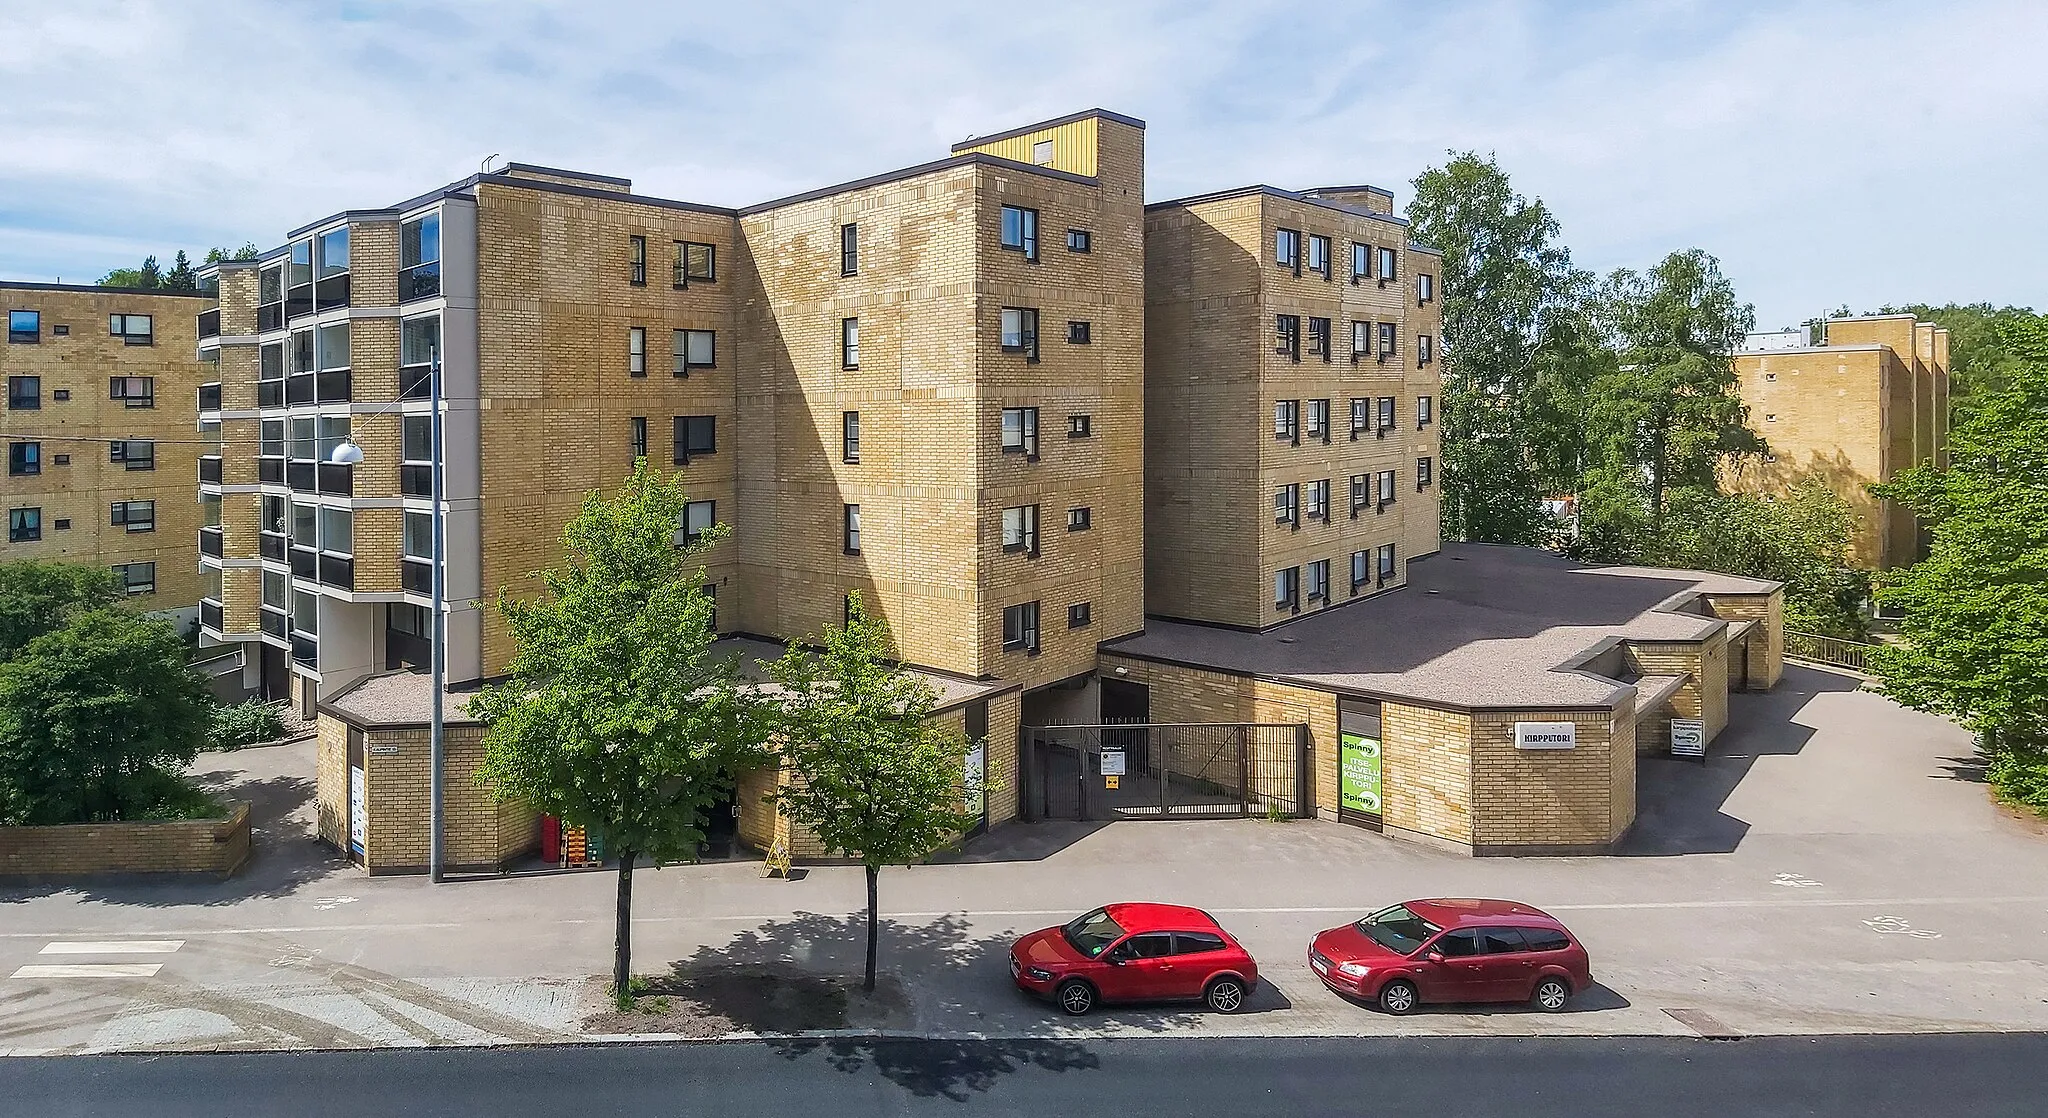 Photo showing: An apartment building complex by Kaupintie from the 1980s in Lassila, Haaga, Helsinki, Finland, 2021 June.